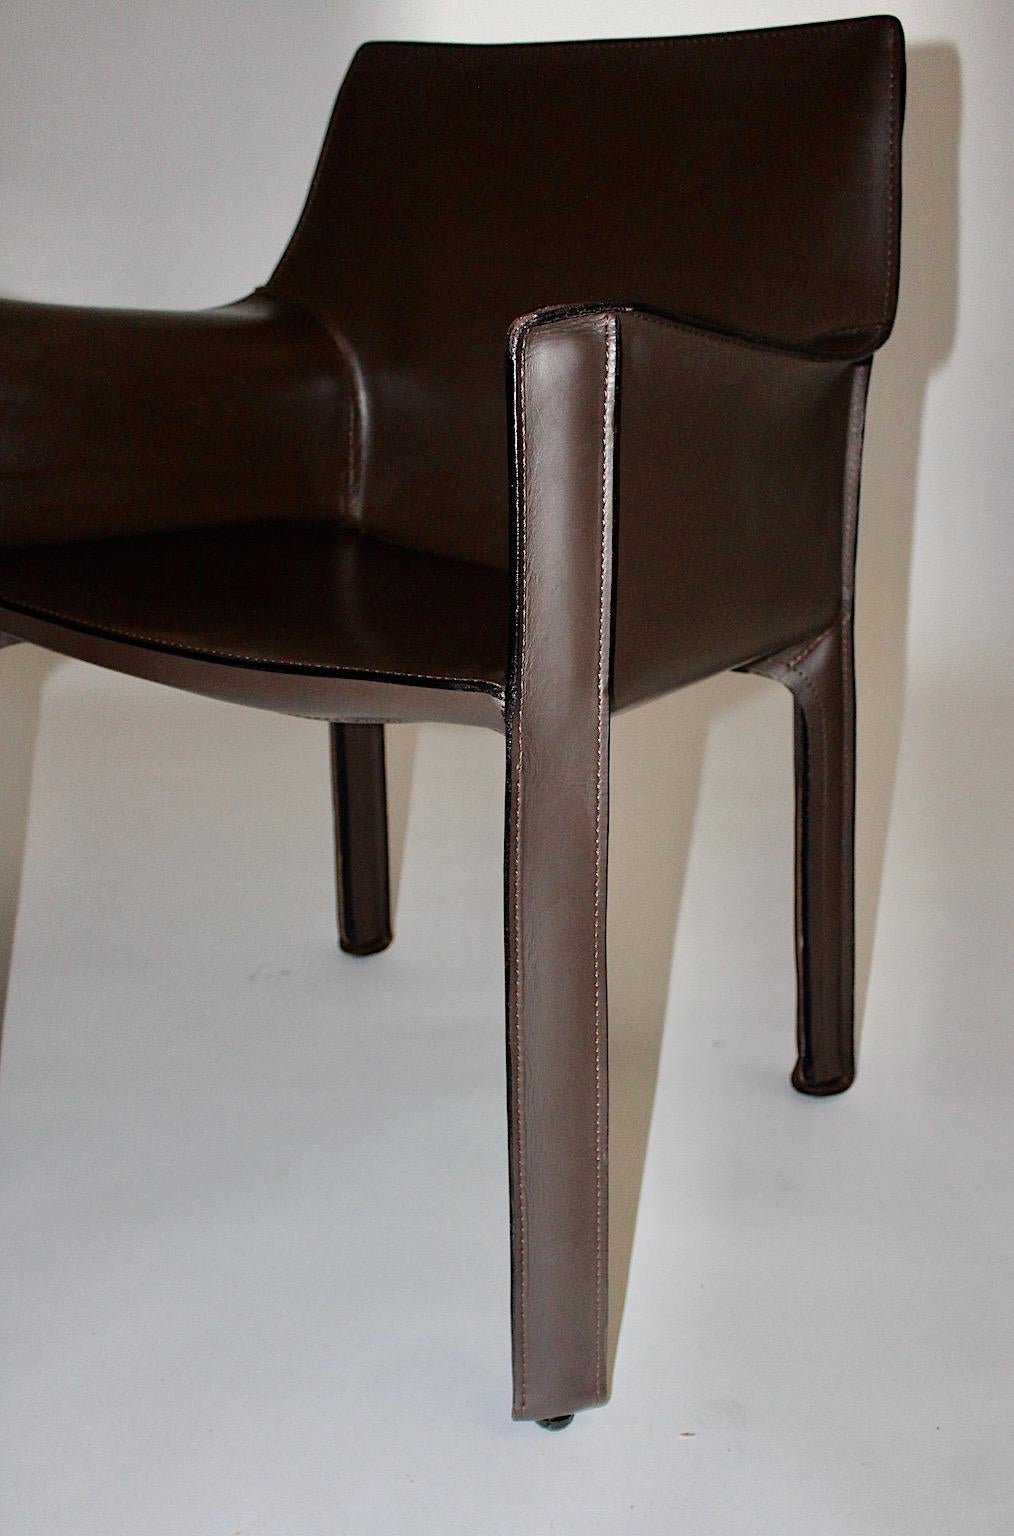 Mario Bellini Vintage Chocolate Brown Leather Dining Chairs Cassina 1970s Italy In Good Condition For Sale In Vienna, AT